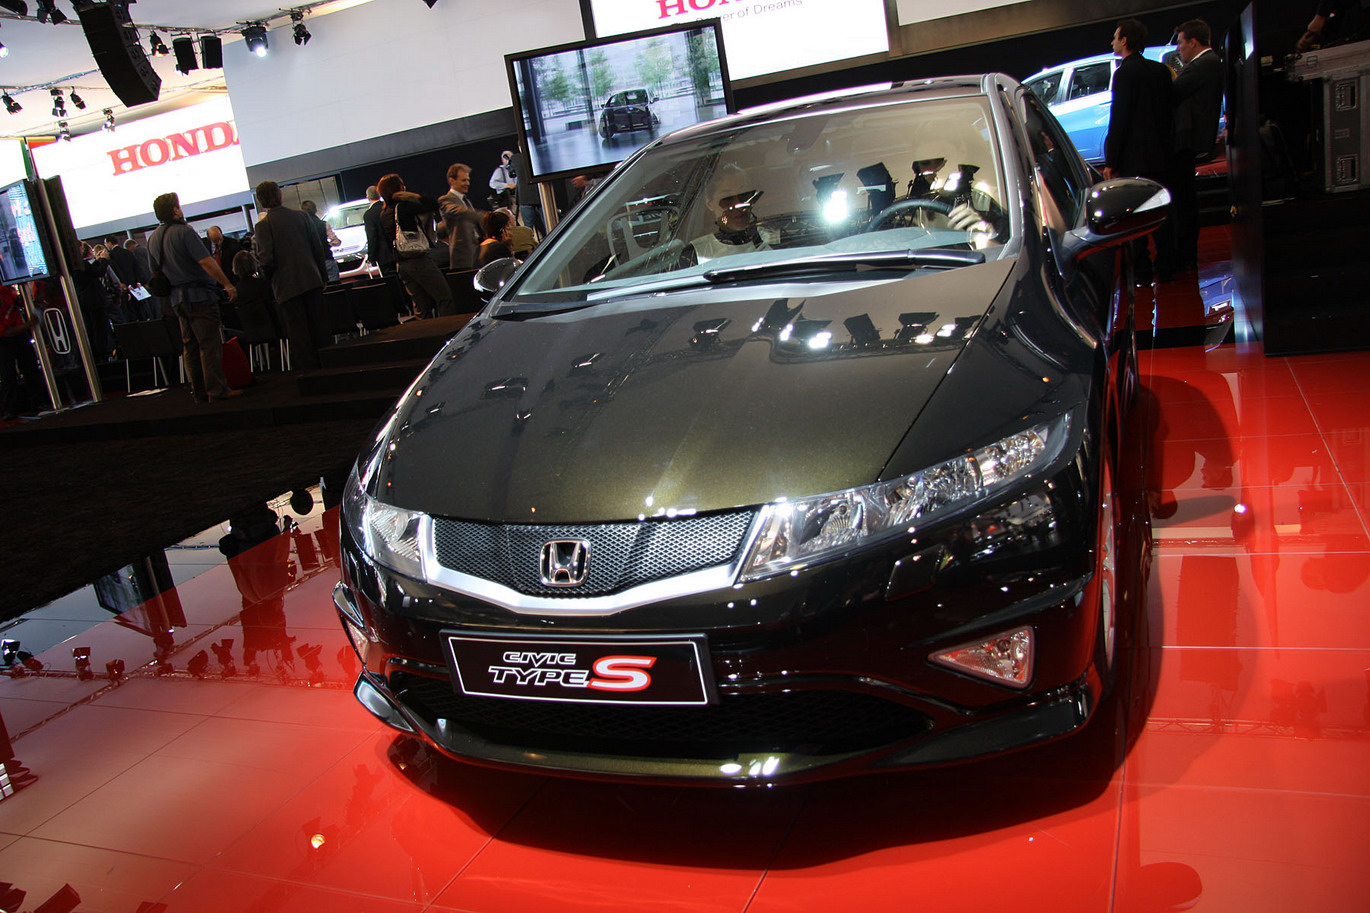 4800rpm. The styling revisions to the 2009 Civic Type-S were modeled on